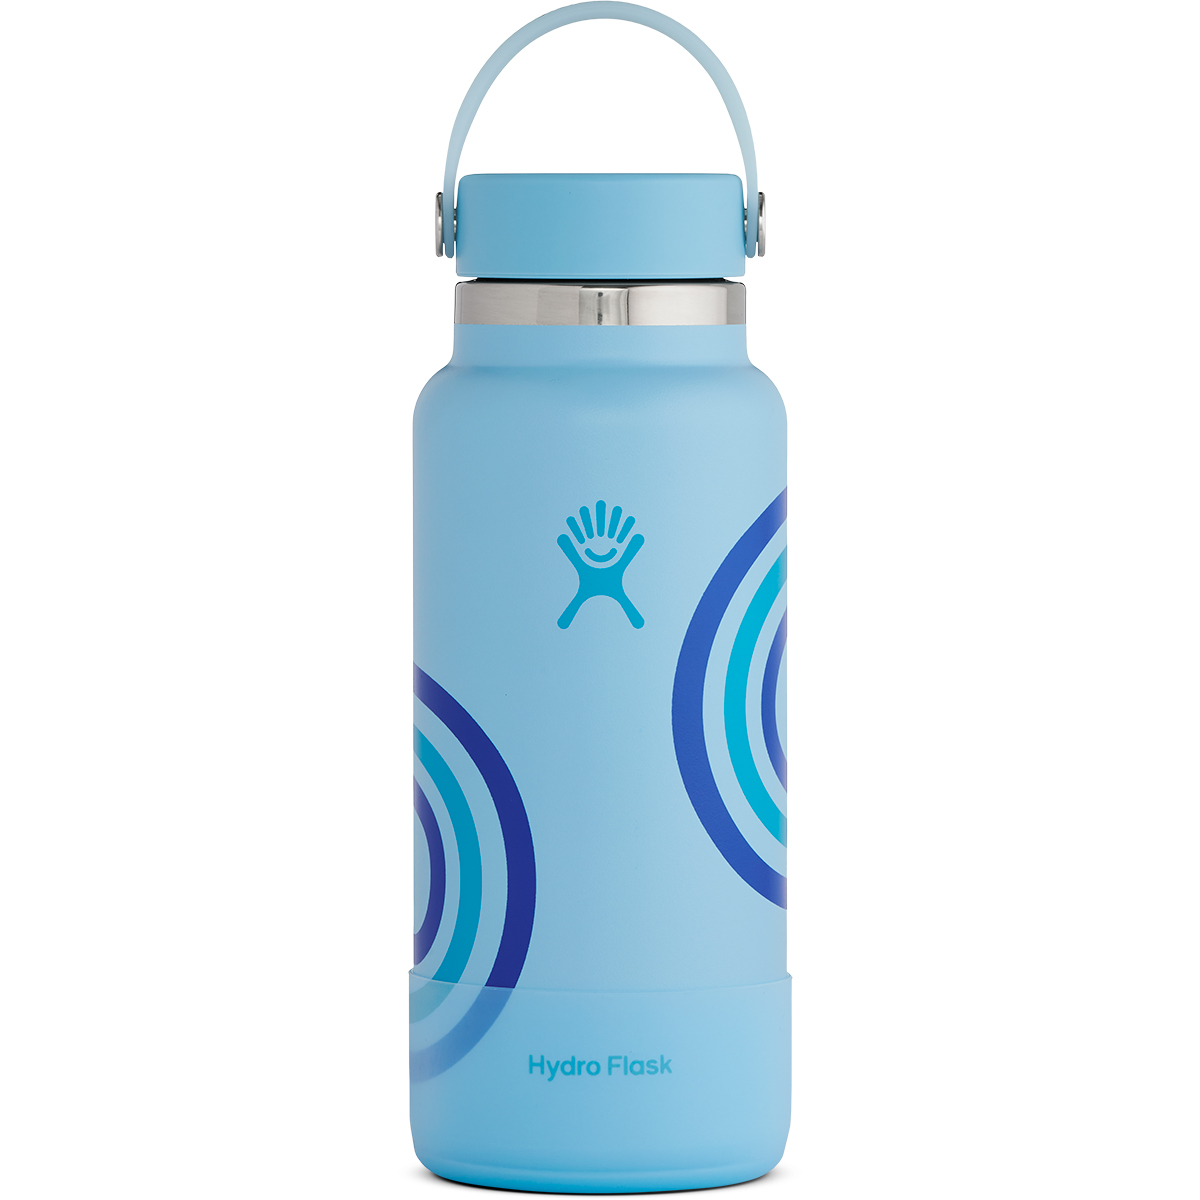 Hydro Flask Refill For Good Limited Edition 32 Oz. Wide Mouth Water Bottle